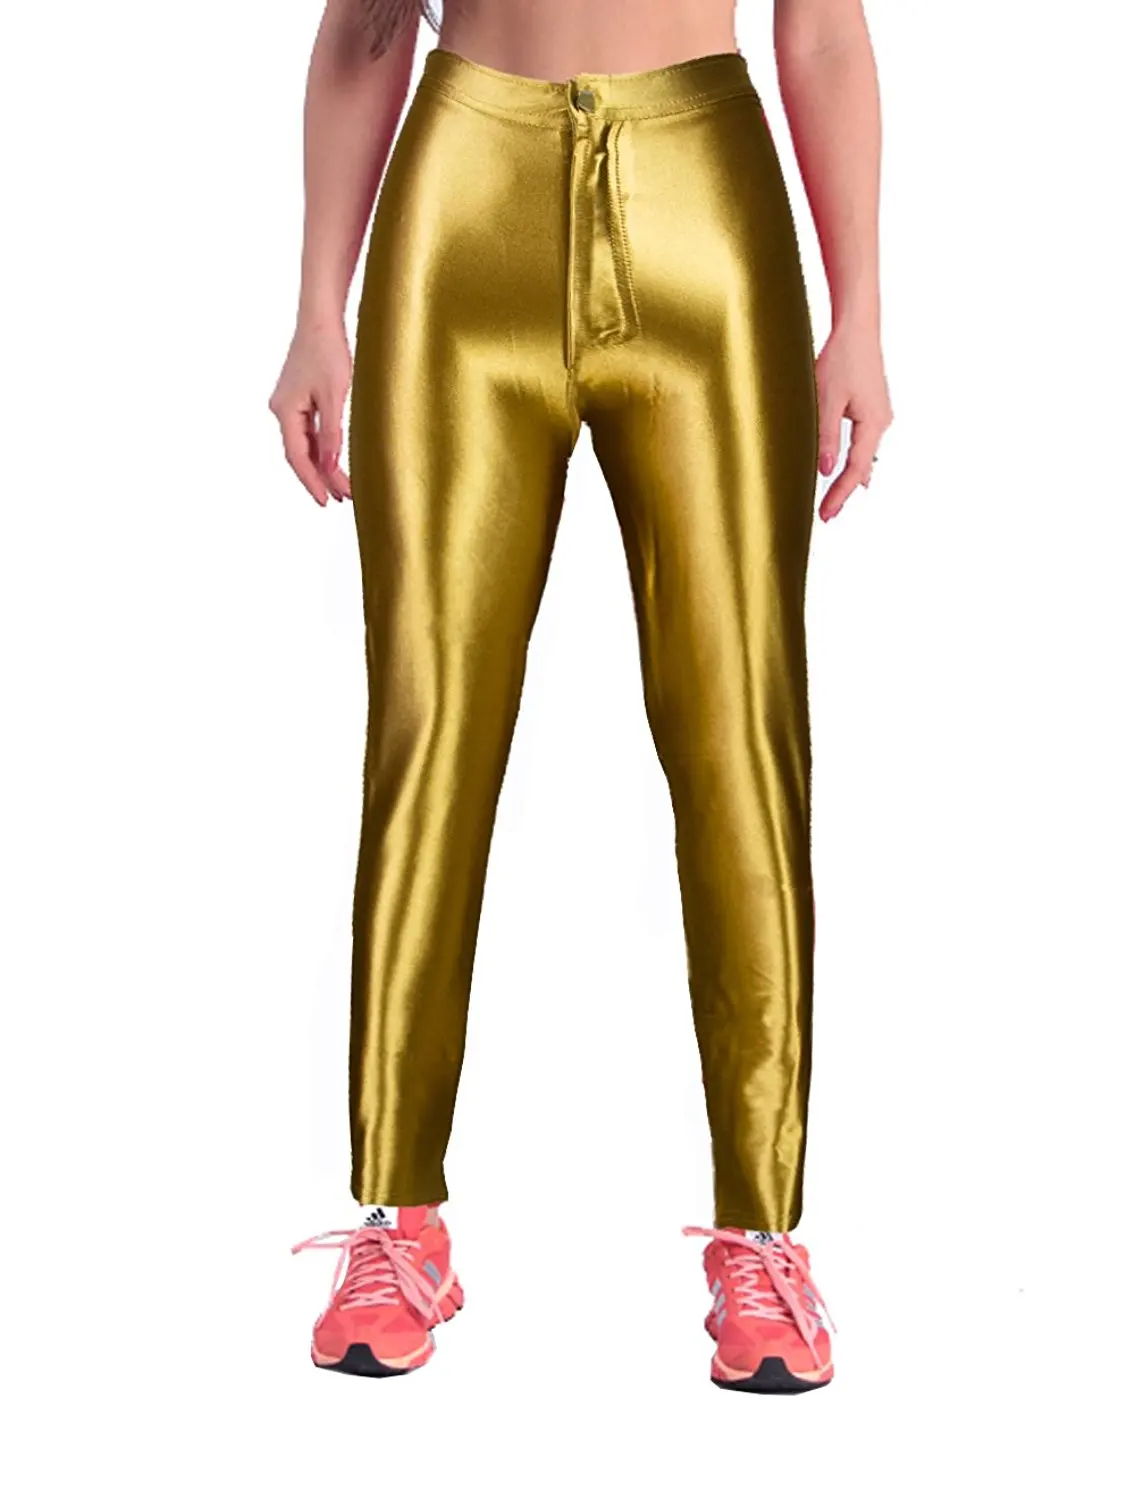 Cheap Red Shiny Disco Pants Find Red Shiny Disco Pants Deals On Line